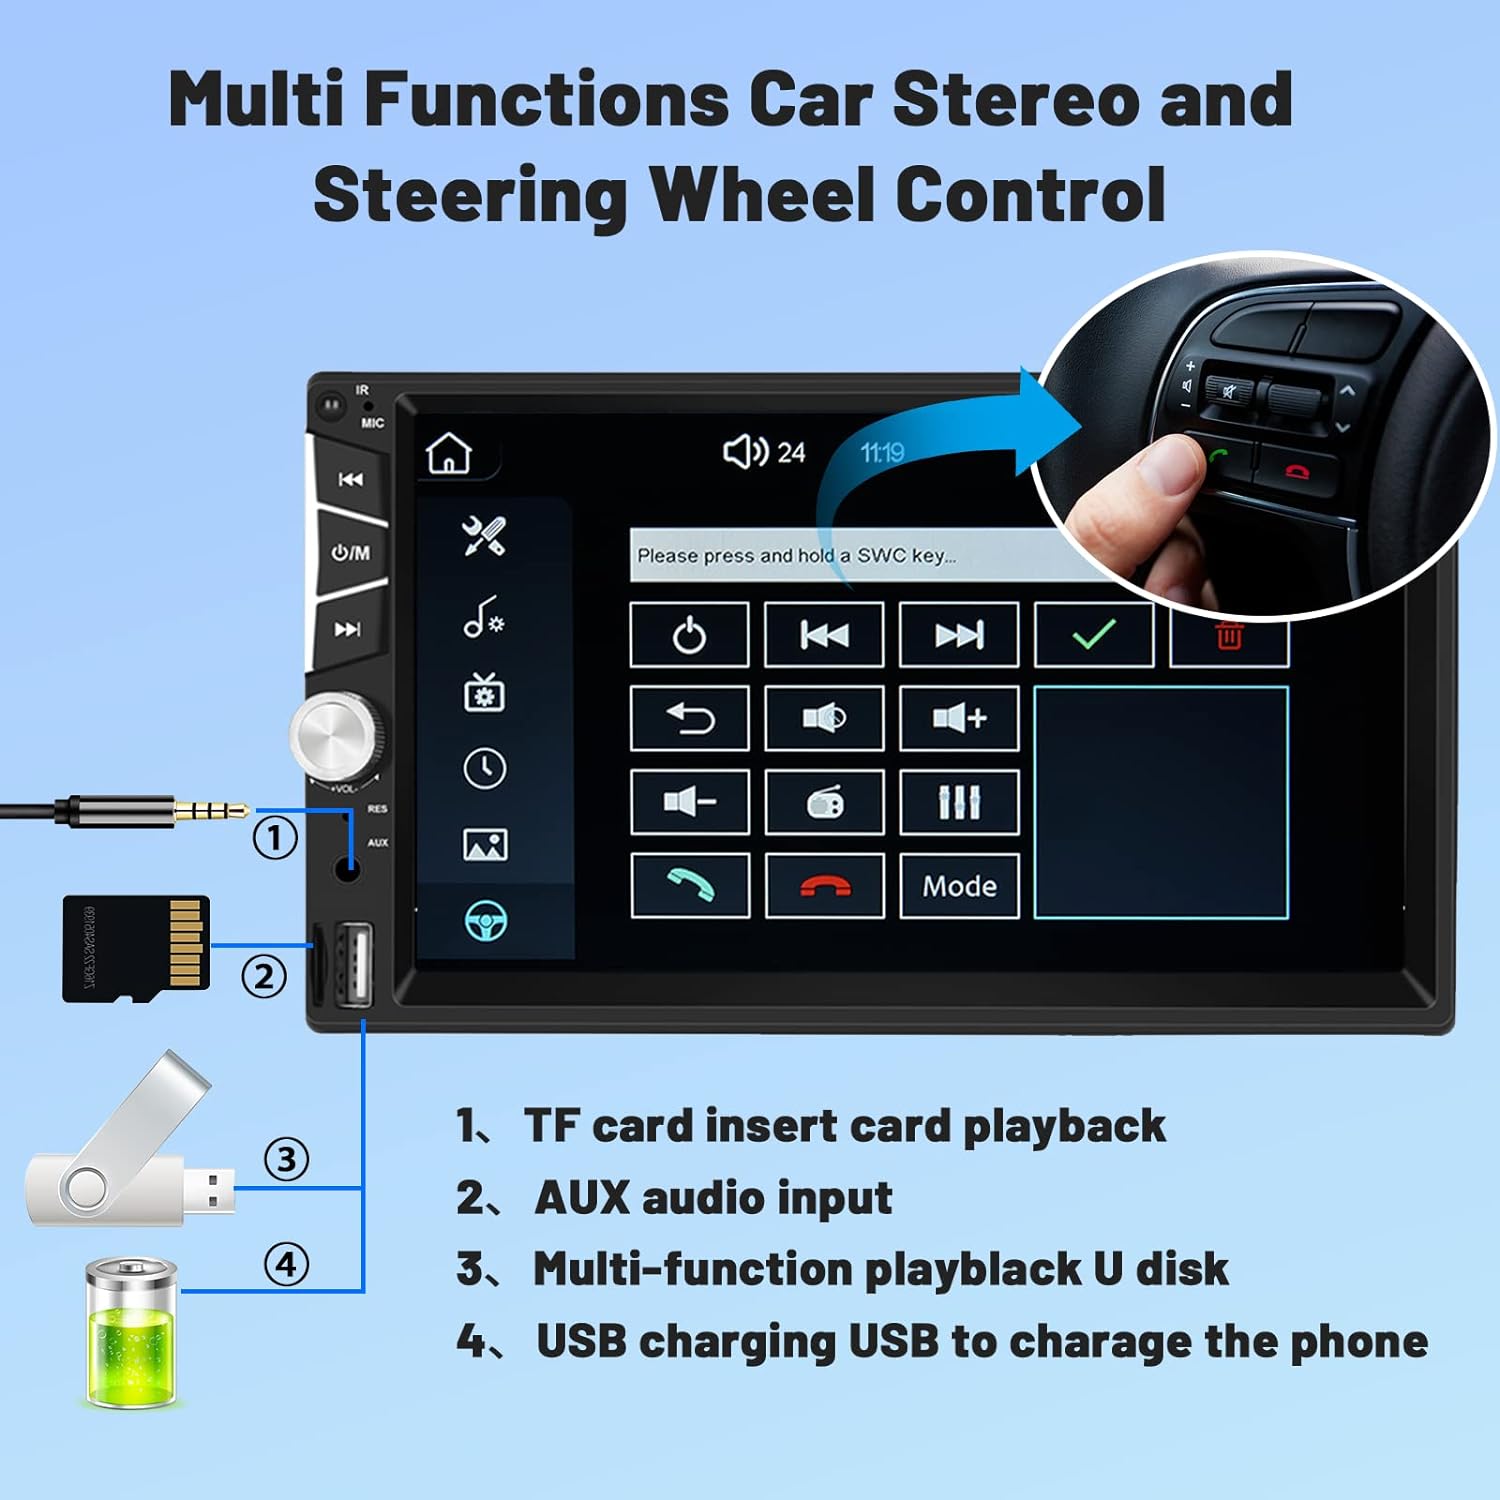 Hikity Double Din Car Stereo with 7 Inch Touch Screen Car Radio Bluetooth with Rear View Camera FM Radio USB TF AUX, Mirror Link for Android/IOS Smartphone + Remote Control + Frame